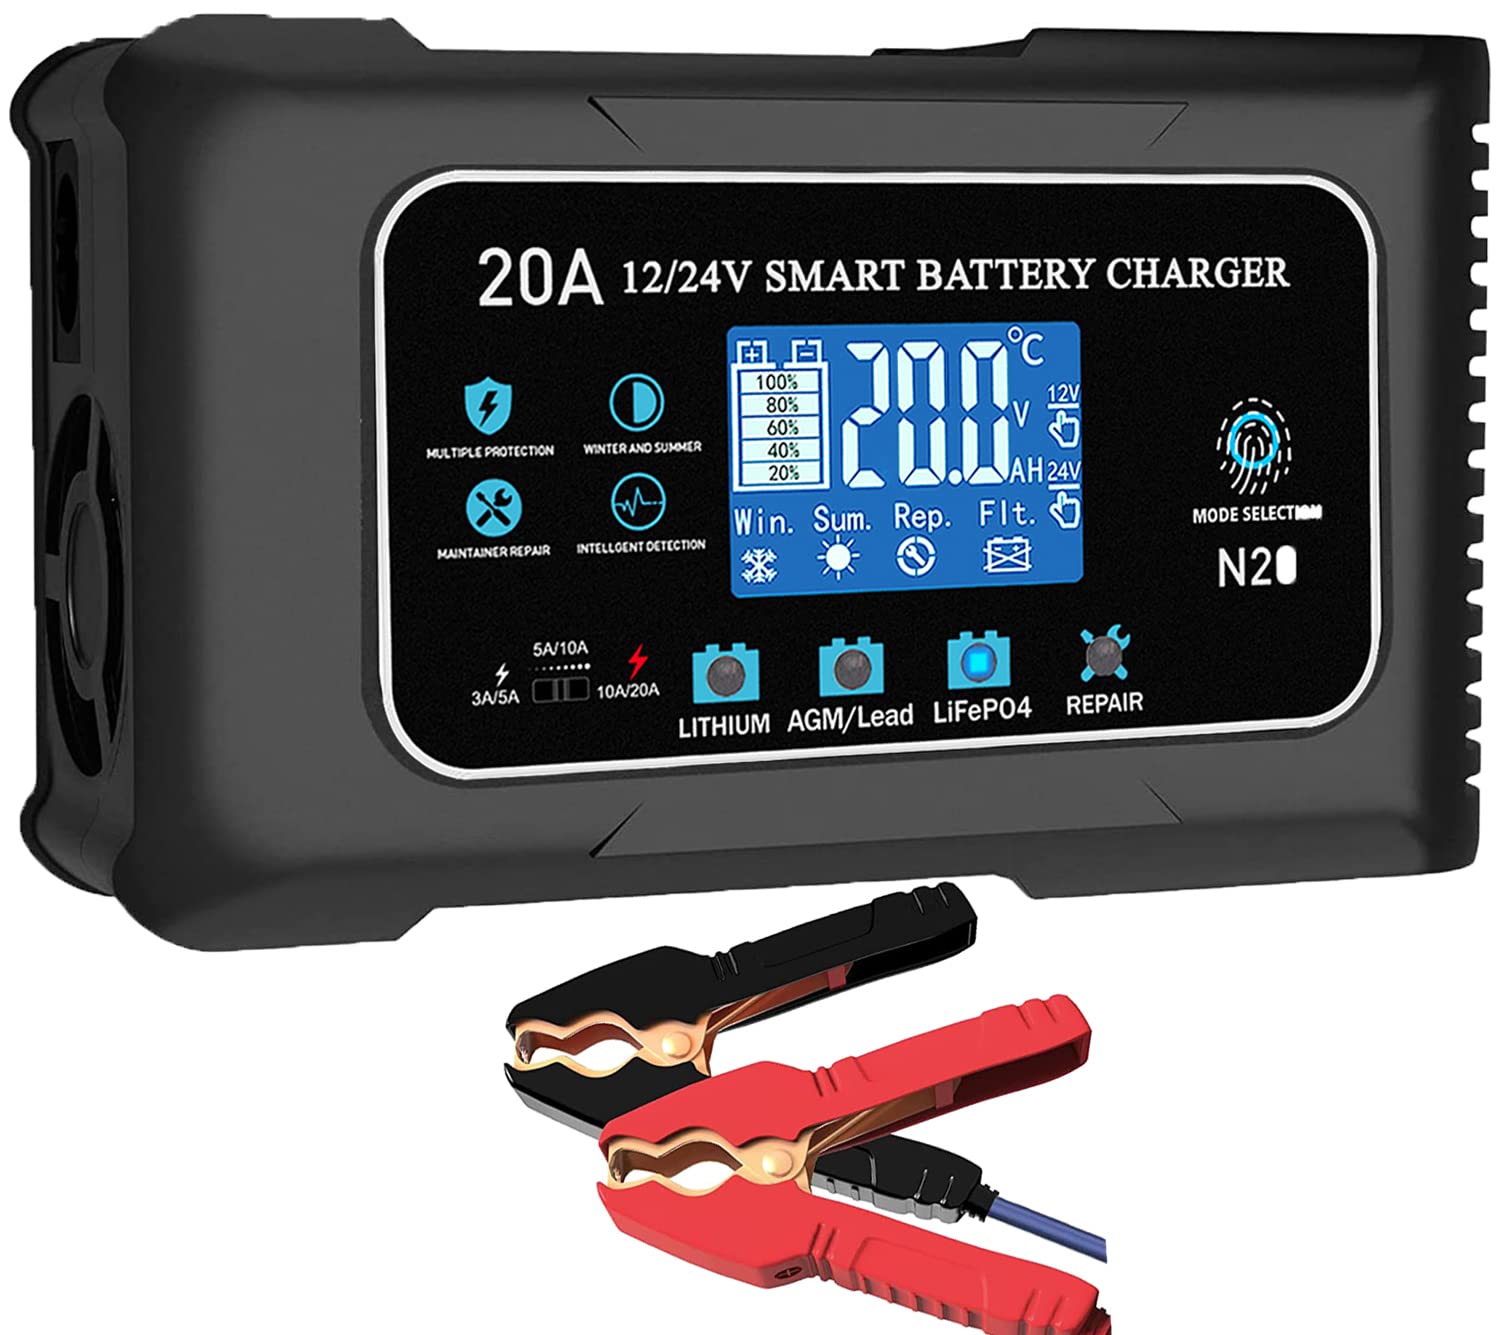 DGHT 20-Amp Lifepo4 Lithium AgM gel Smart Battery charger, 12V20A 24V10A Trickle charger, Maintainer for car Boat Motorcycle, Lawn Mo